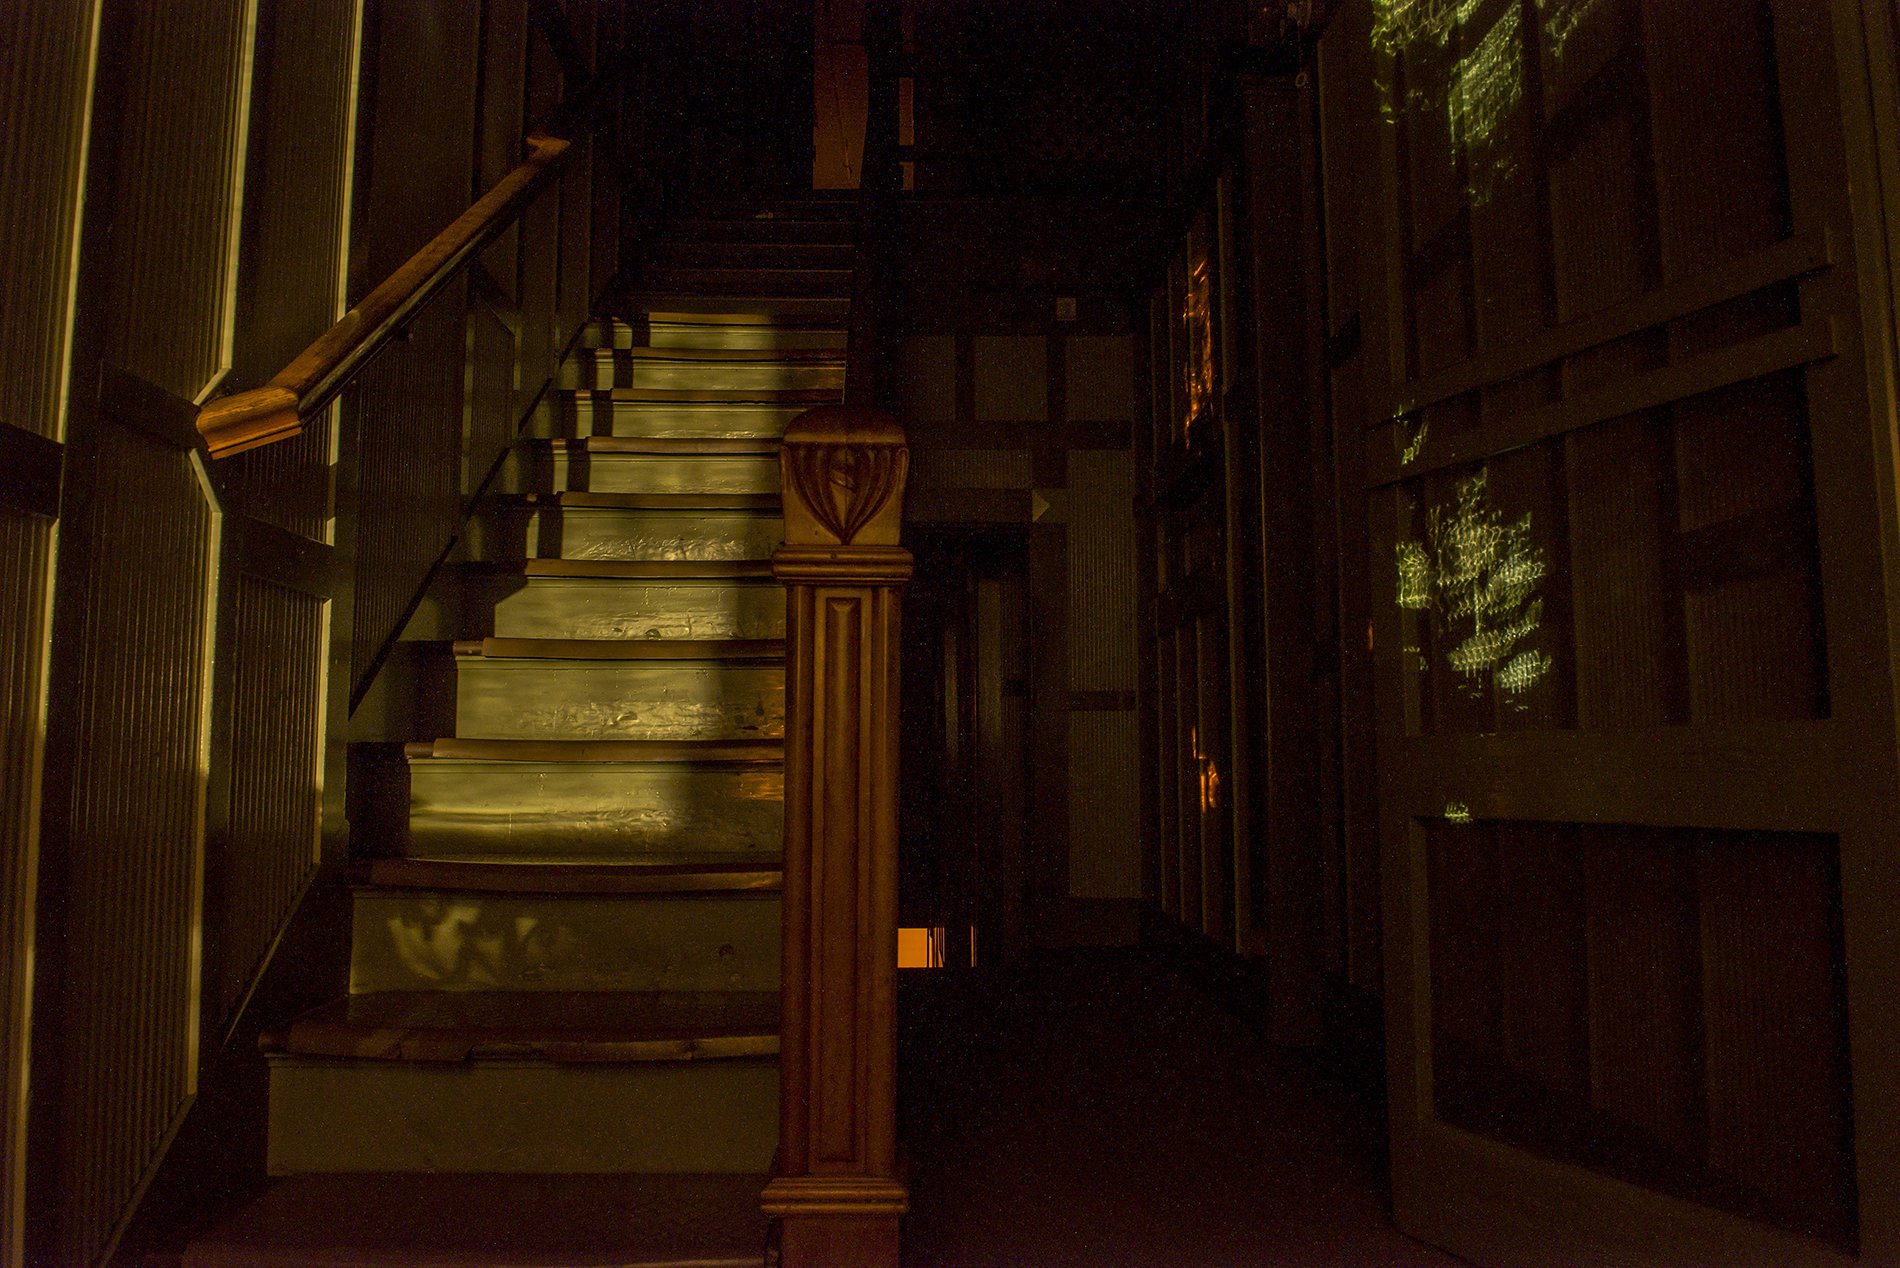 A staircase in the home at night